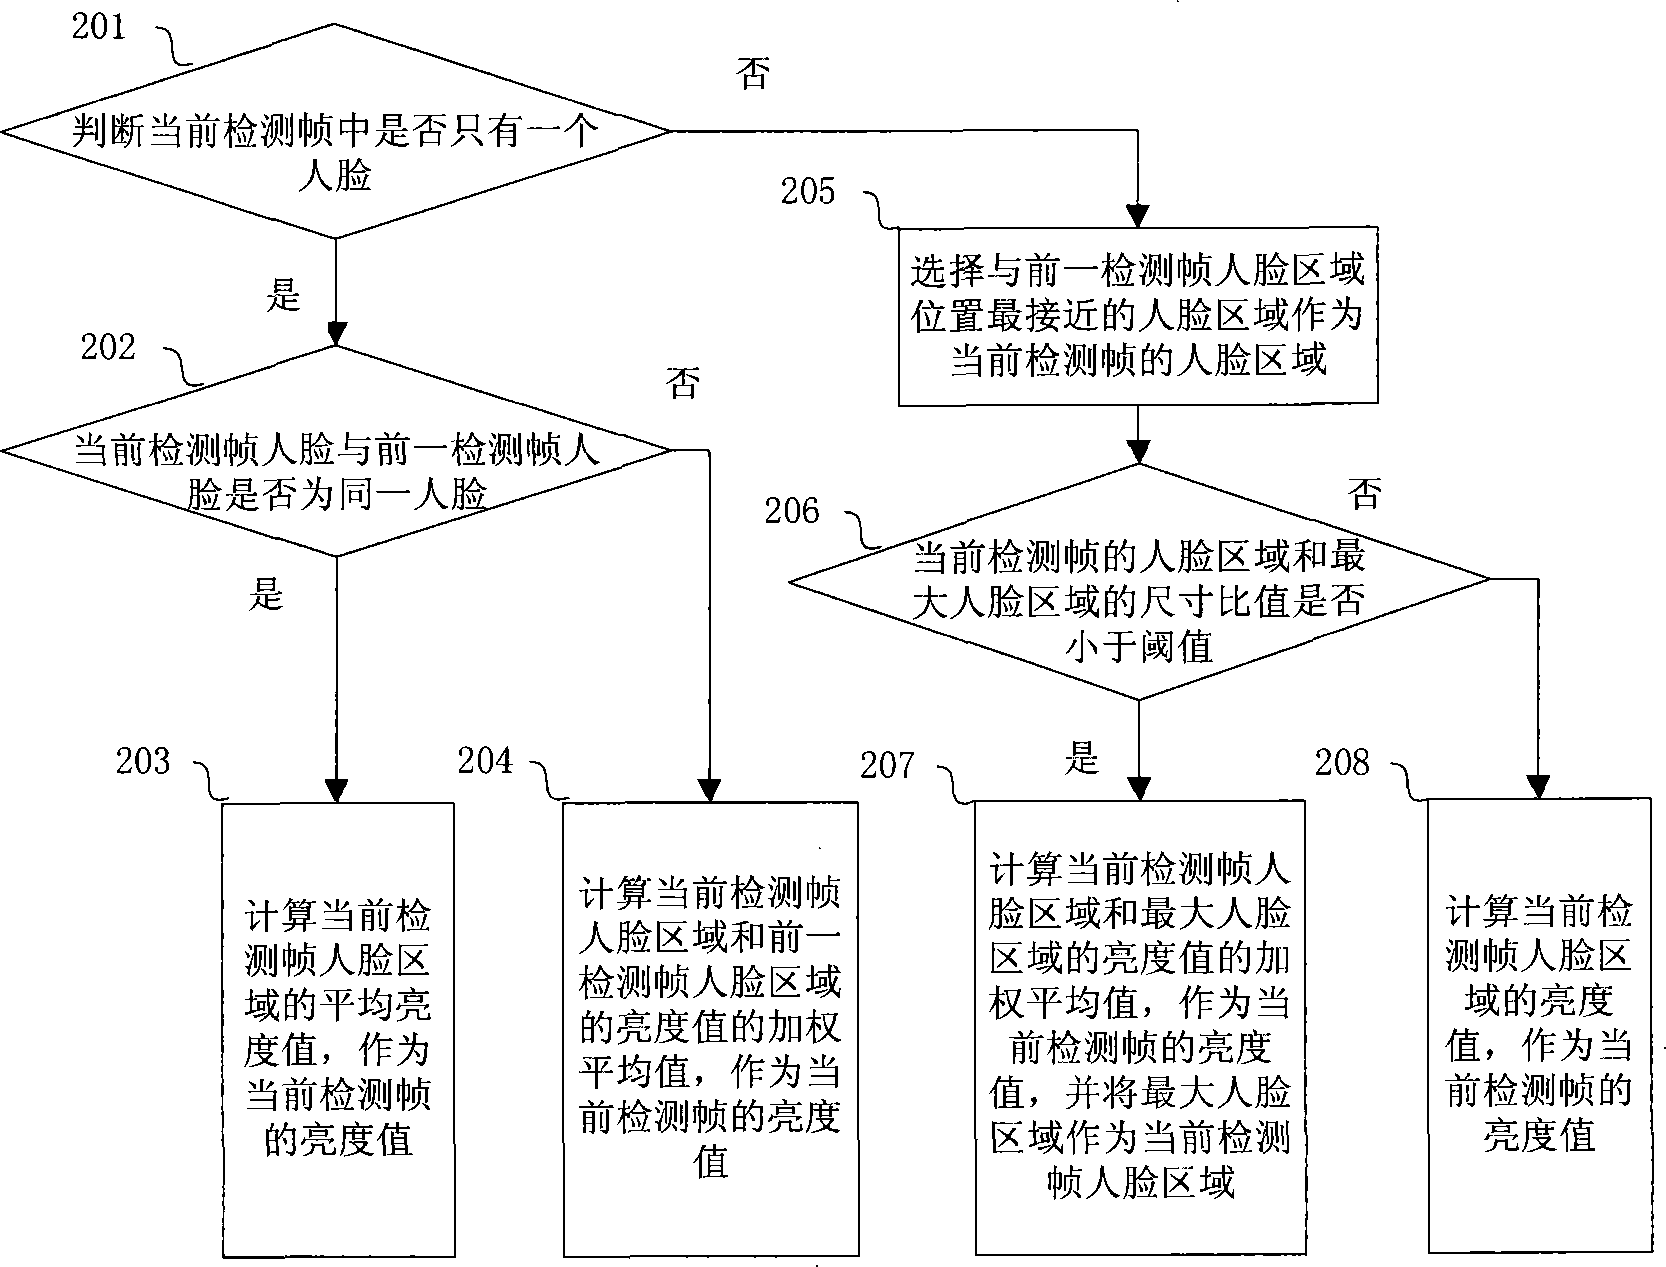 Automatic exposure method based on objective area in image